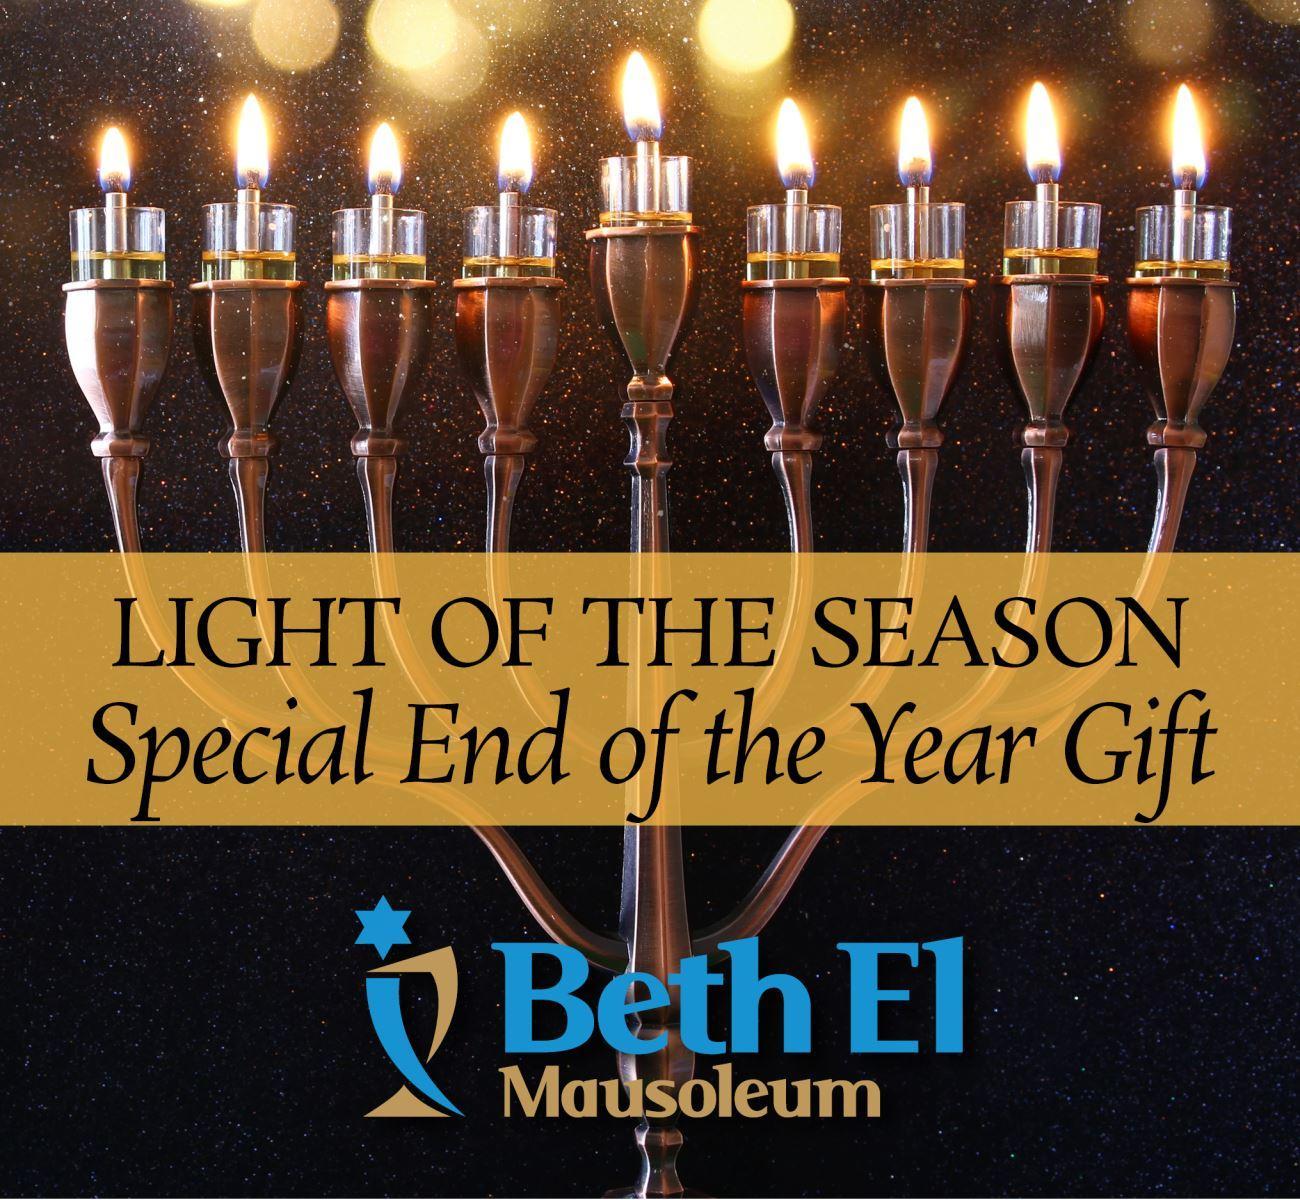 Mausoleum Promotional Image used in the Celebration of the Light of Chanukah with a Special Gift | December 31, 2021